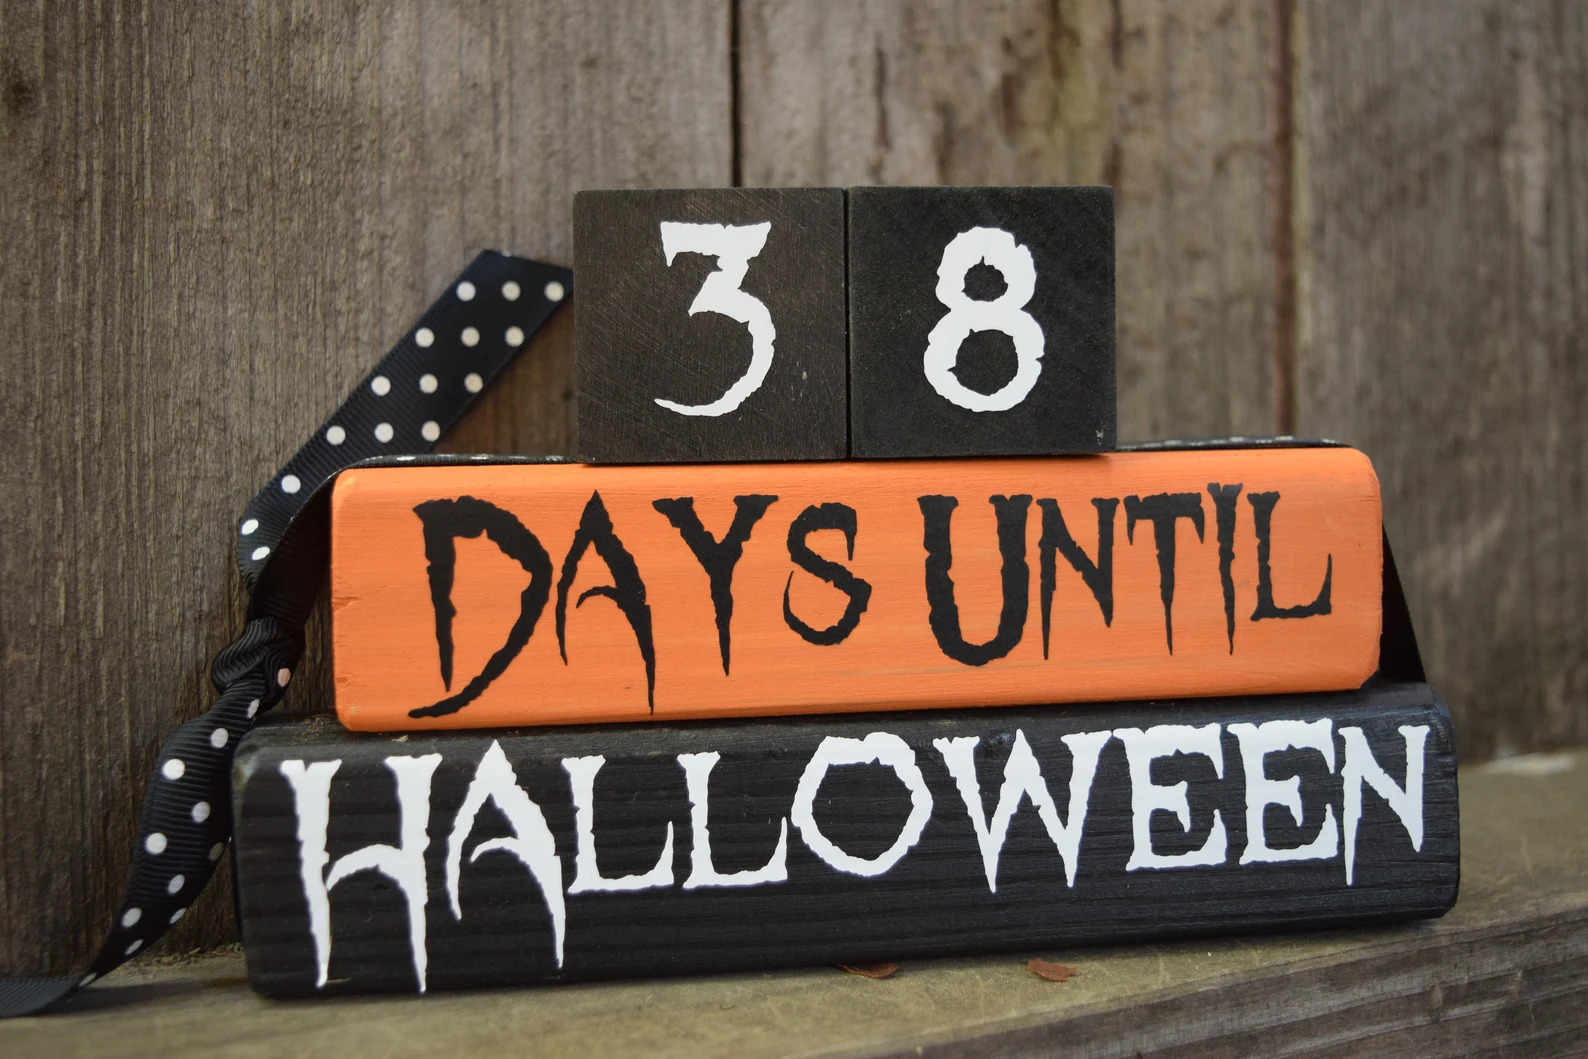 16 Creepy Halloween Decorations For Your Home